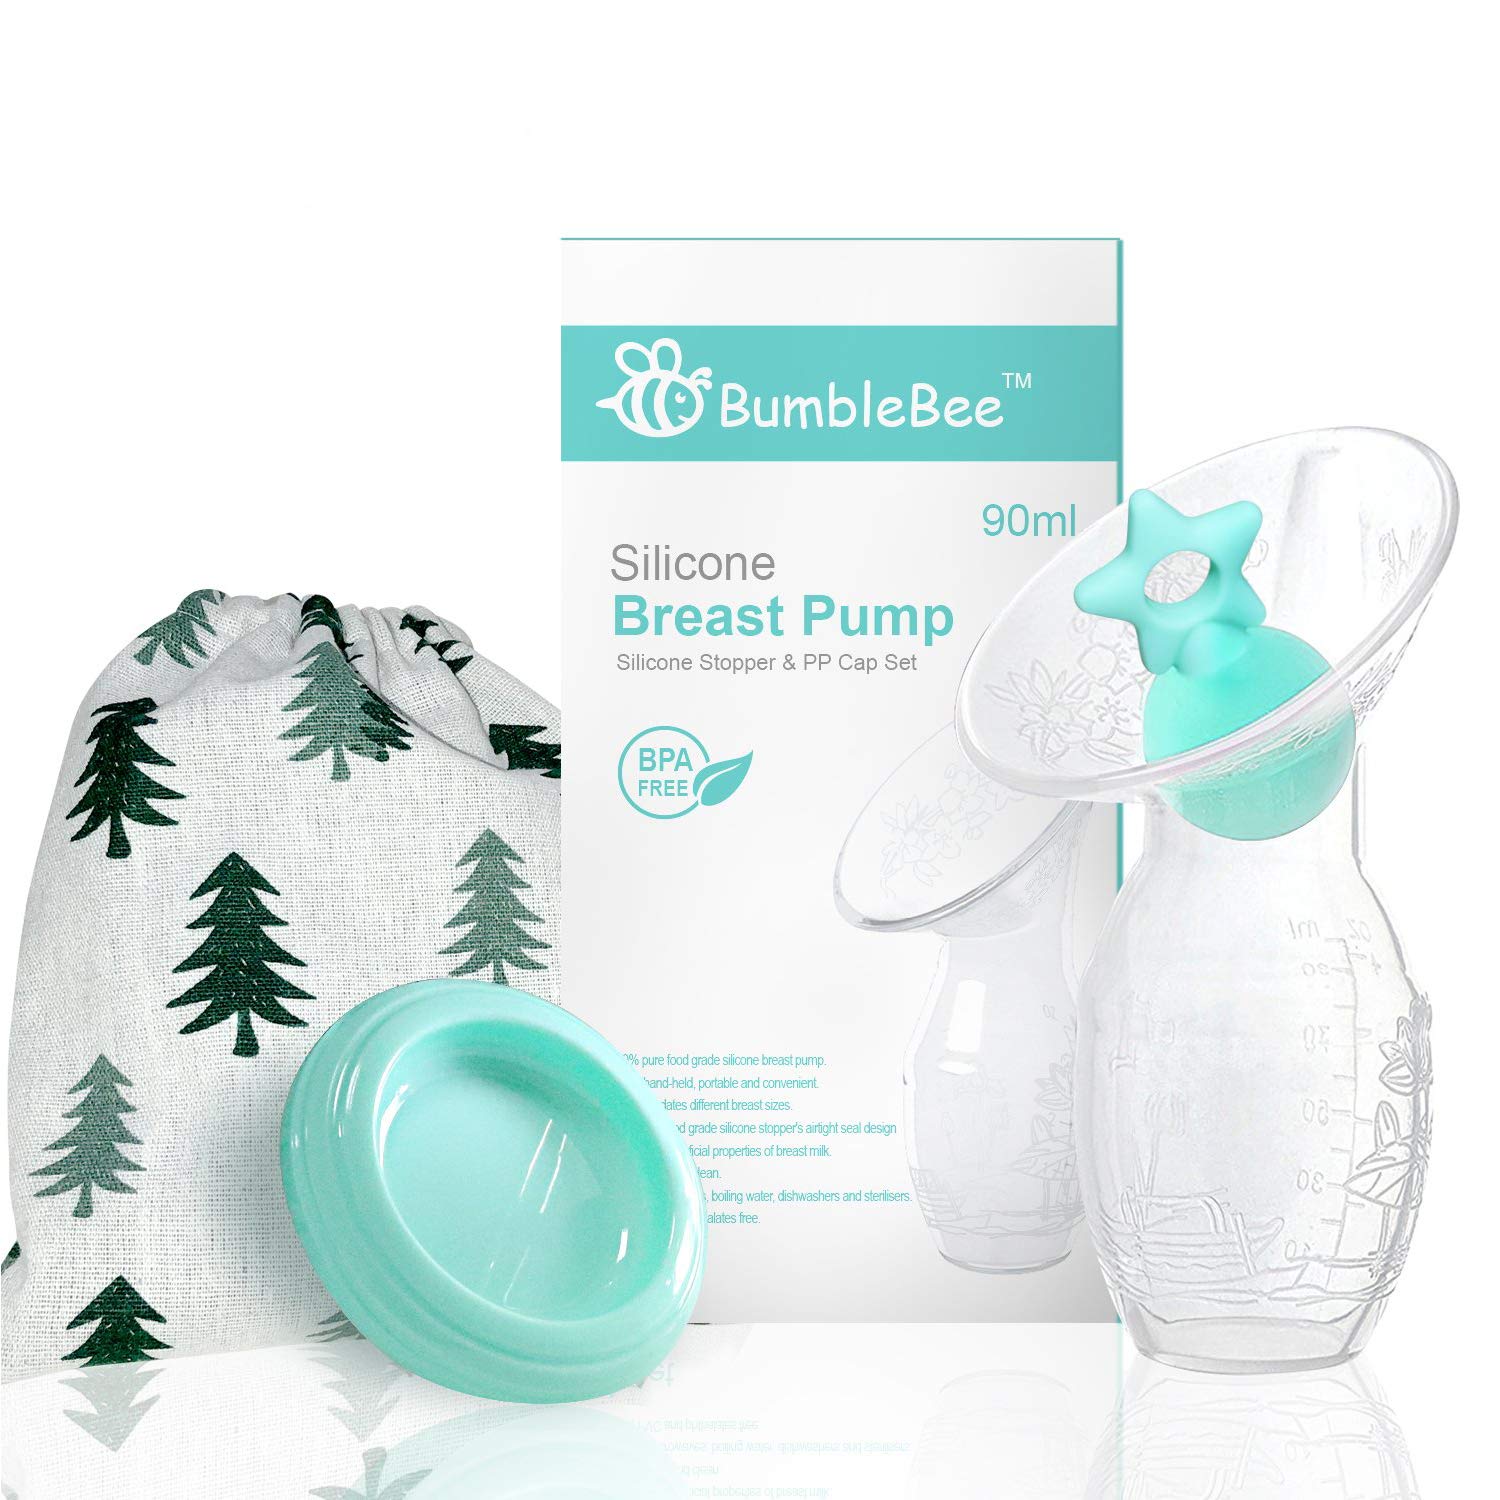 Bumblebee Breast Pump Manual Breast Pump Breastfeeding with Pump Stopper lid Pouch in Gift Box Silicone Breast Pump, Green Star Shape…